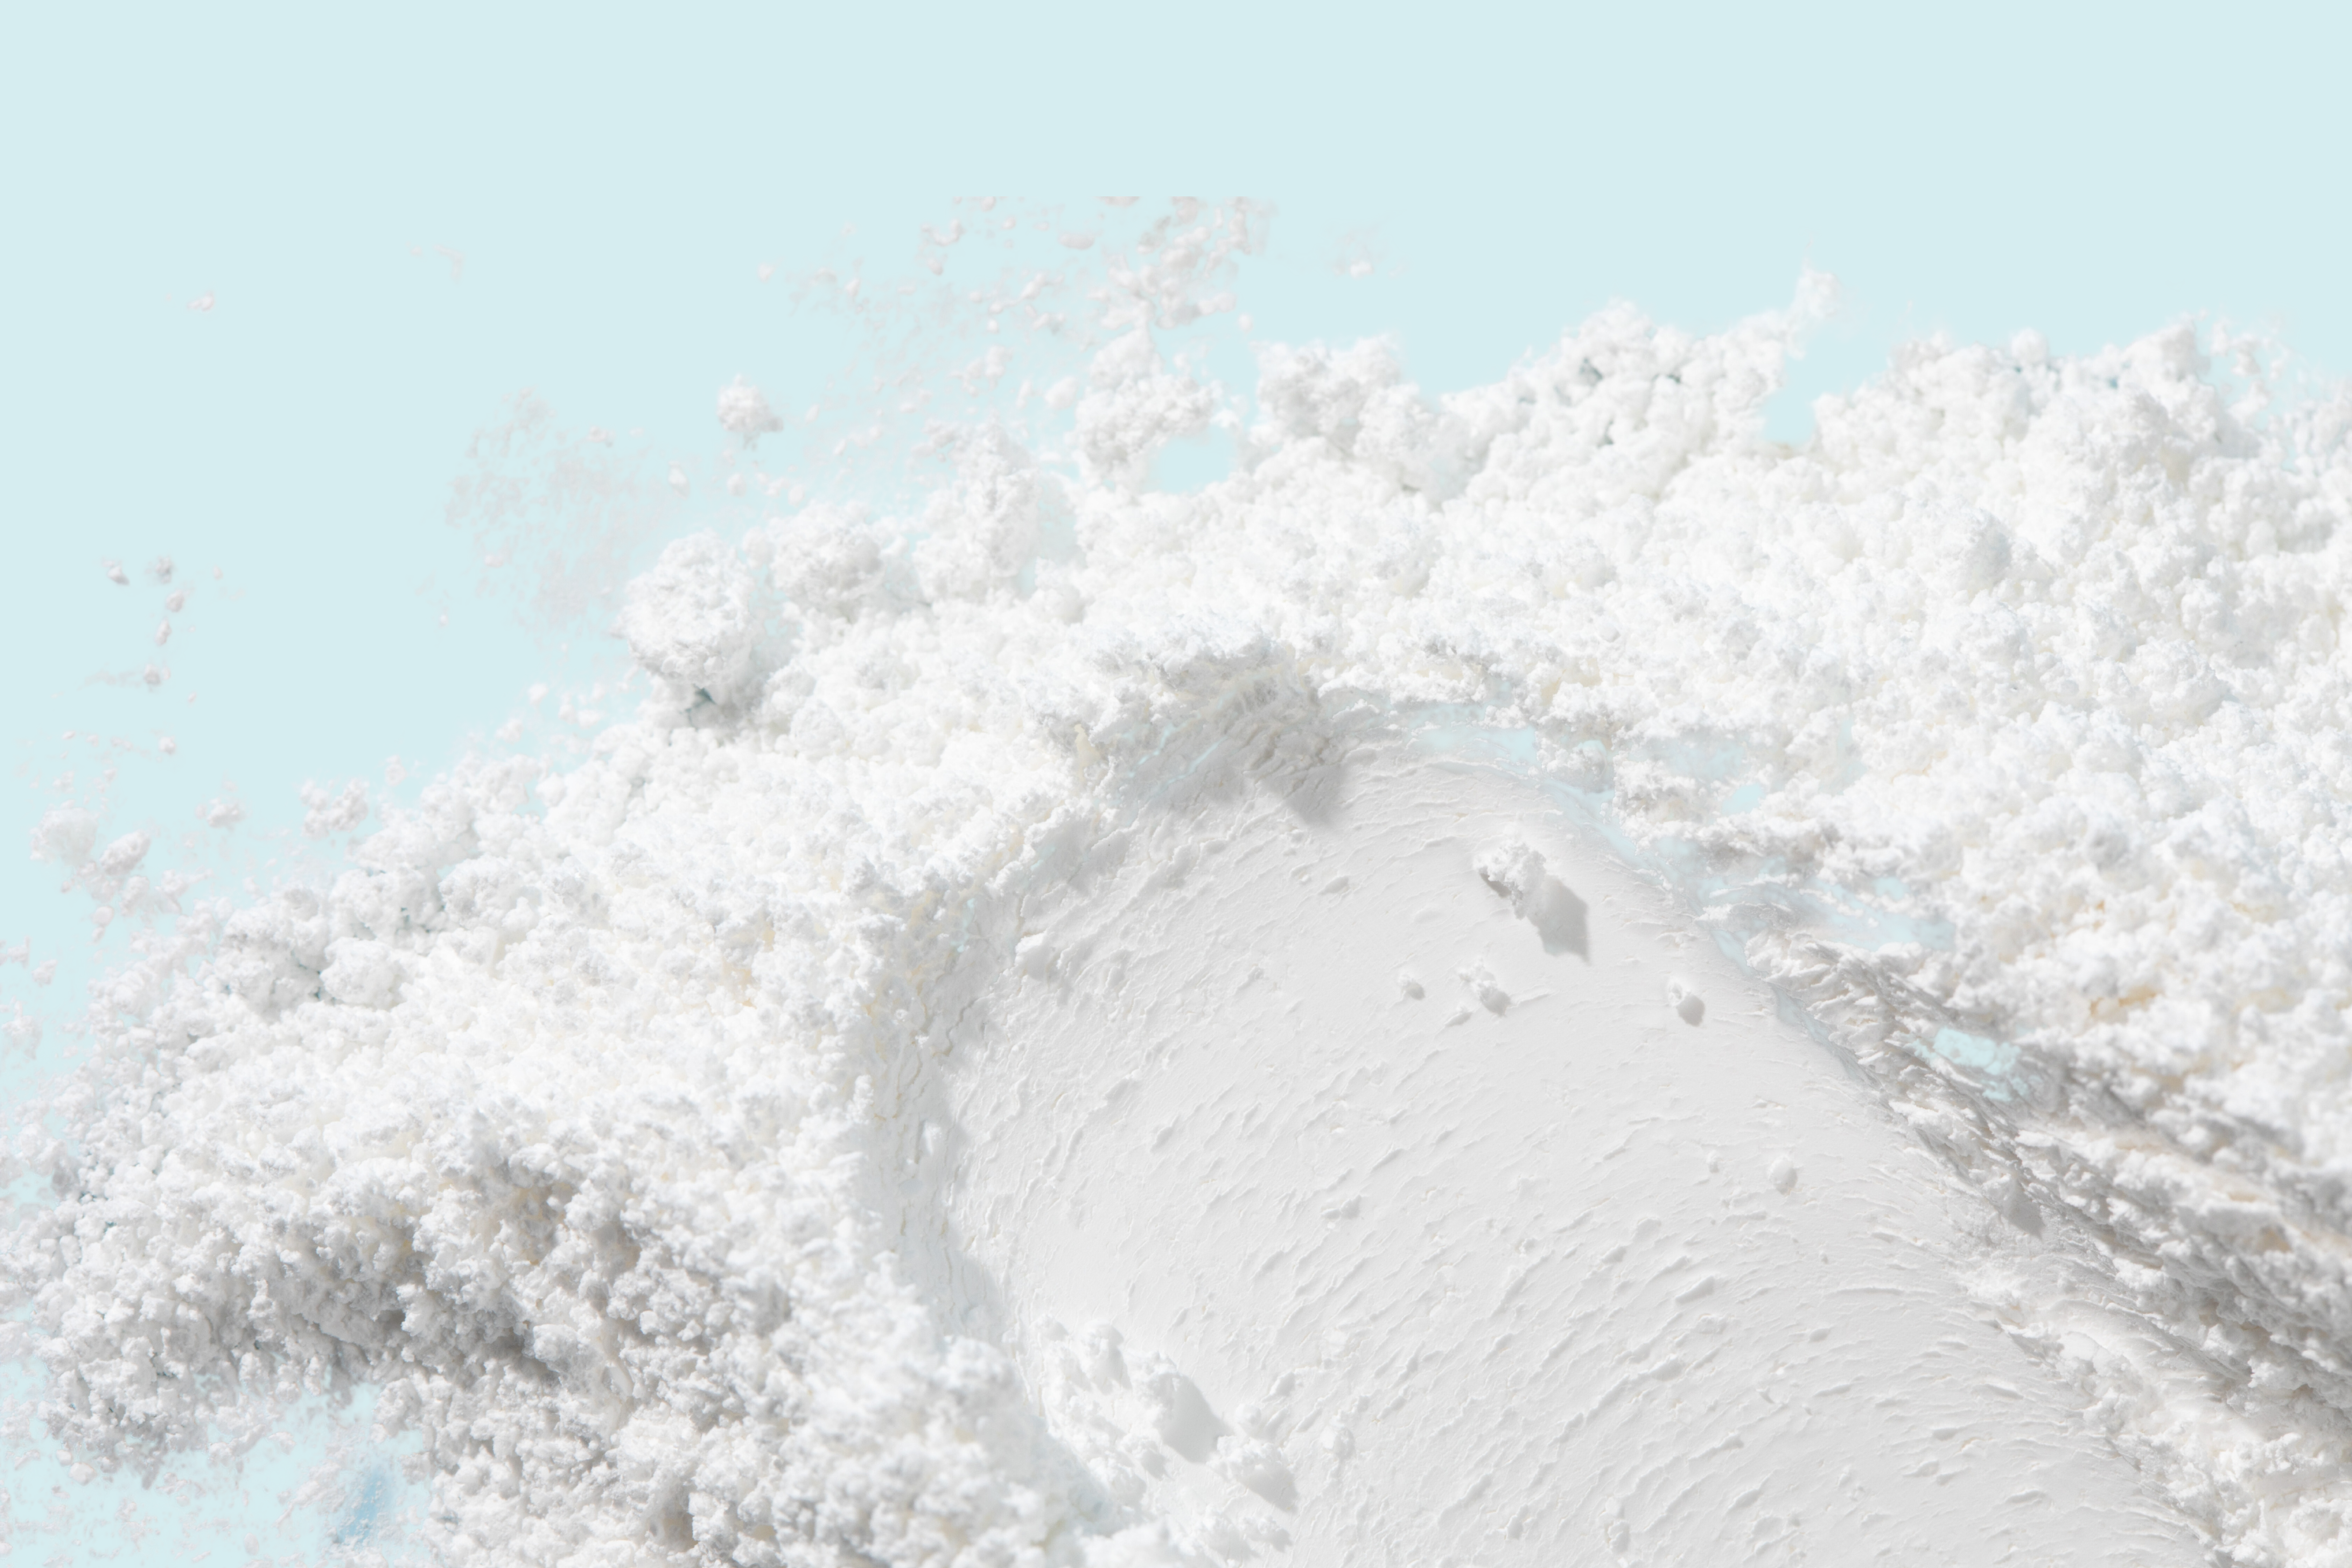 EnviroKlenz Laundry Enhancer Powder contains earth-friendly ingredients and mineral-based FAST-ACT Technology